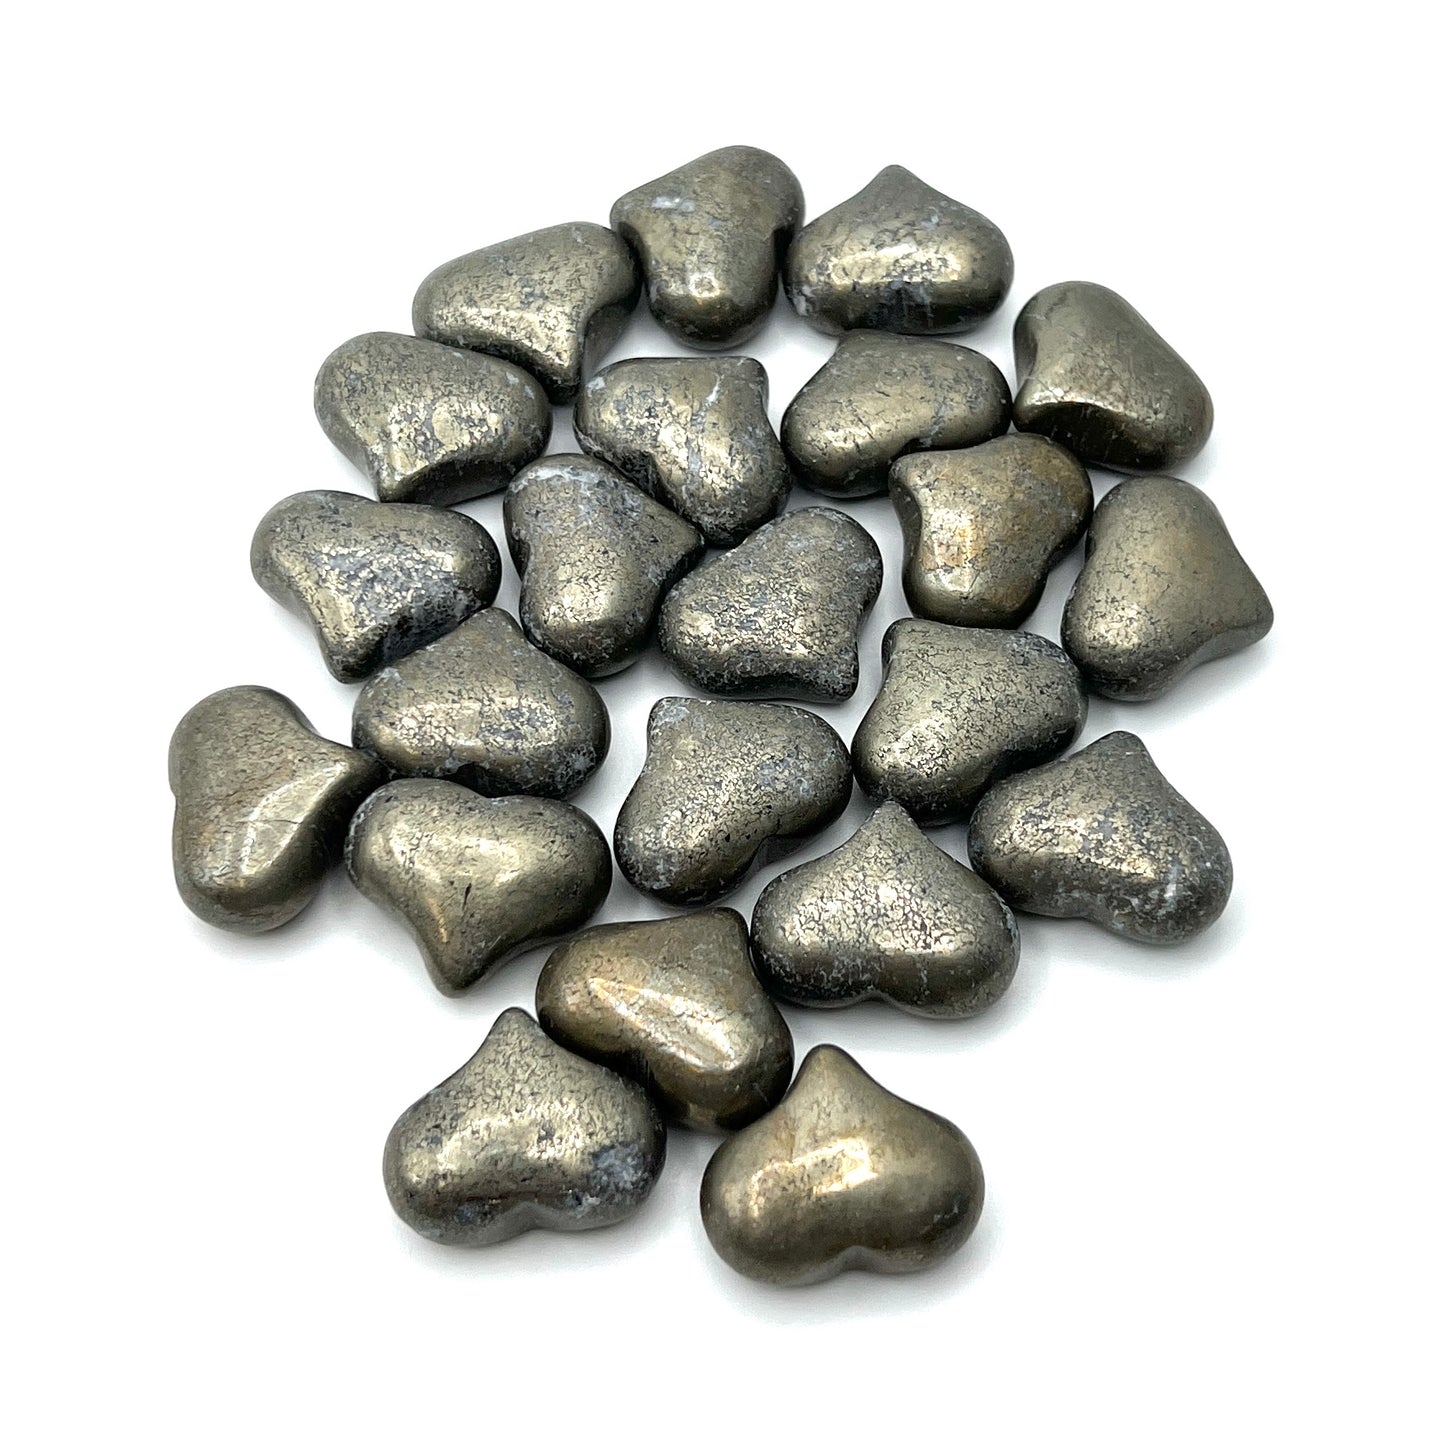 Pyrite Puffy Hearts